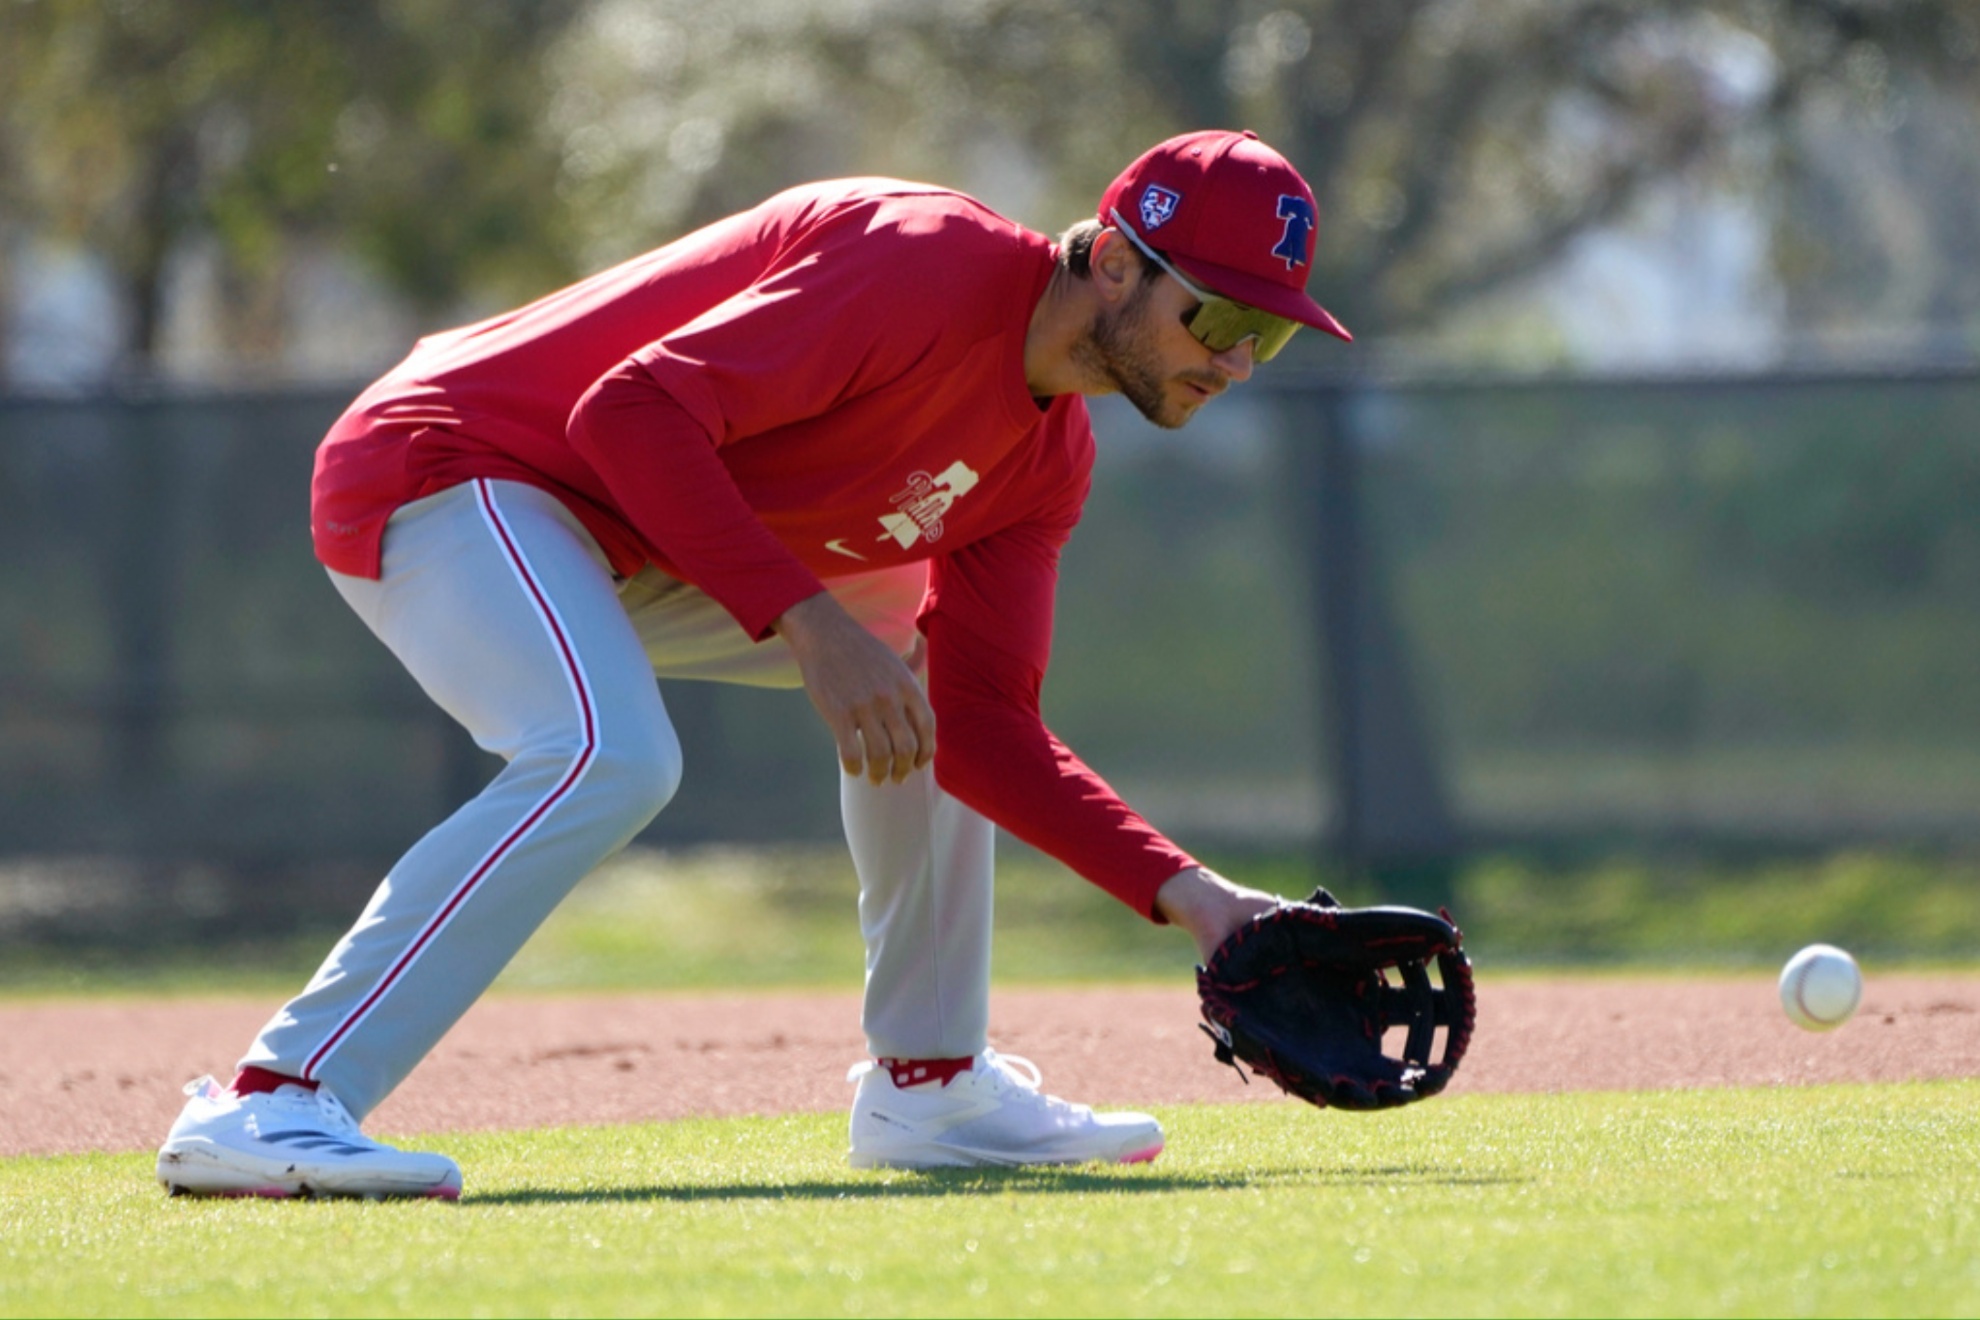 Trea Turner fields a ground ball during a baseball spring training.